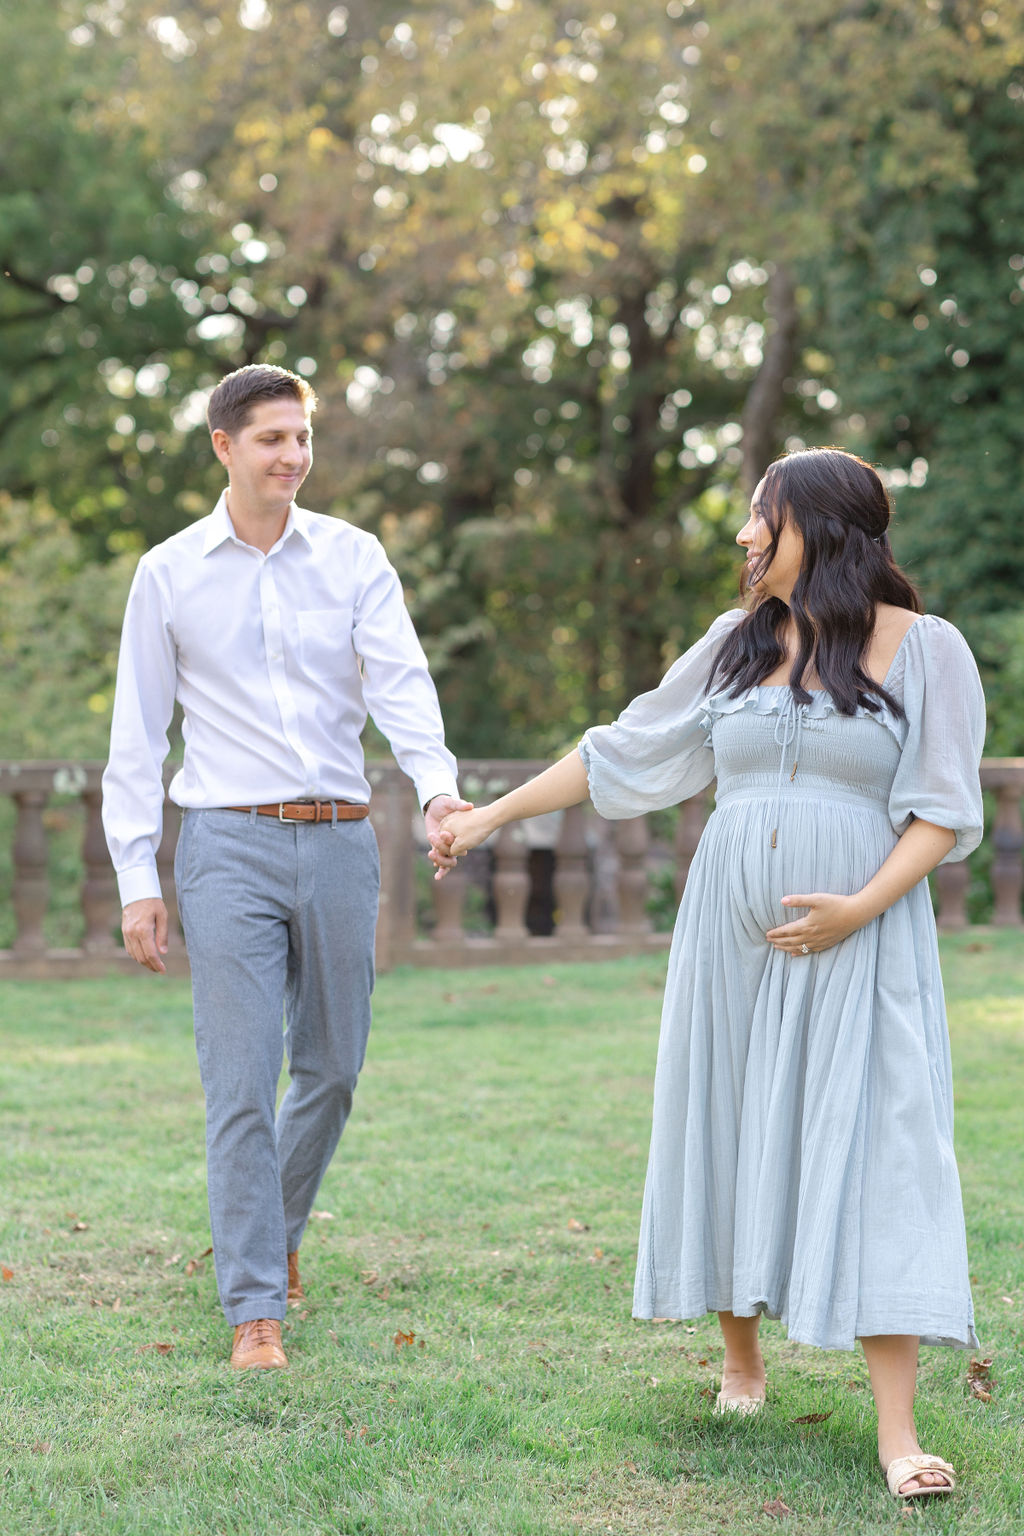 A mom to be in a blue maternity gown leads her partner in a white shirt and grey slacks through a park at sunset